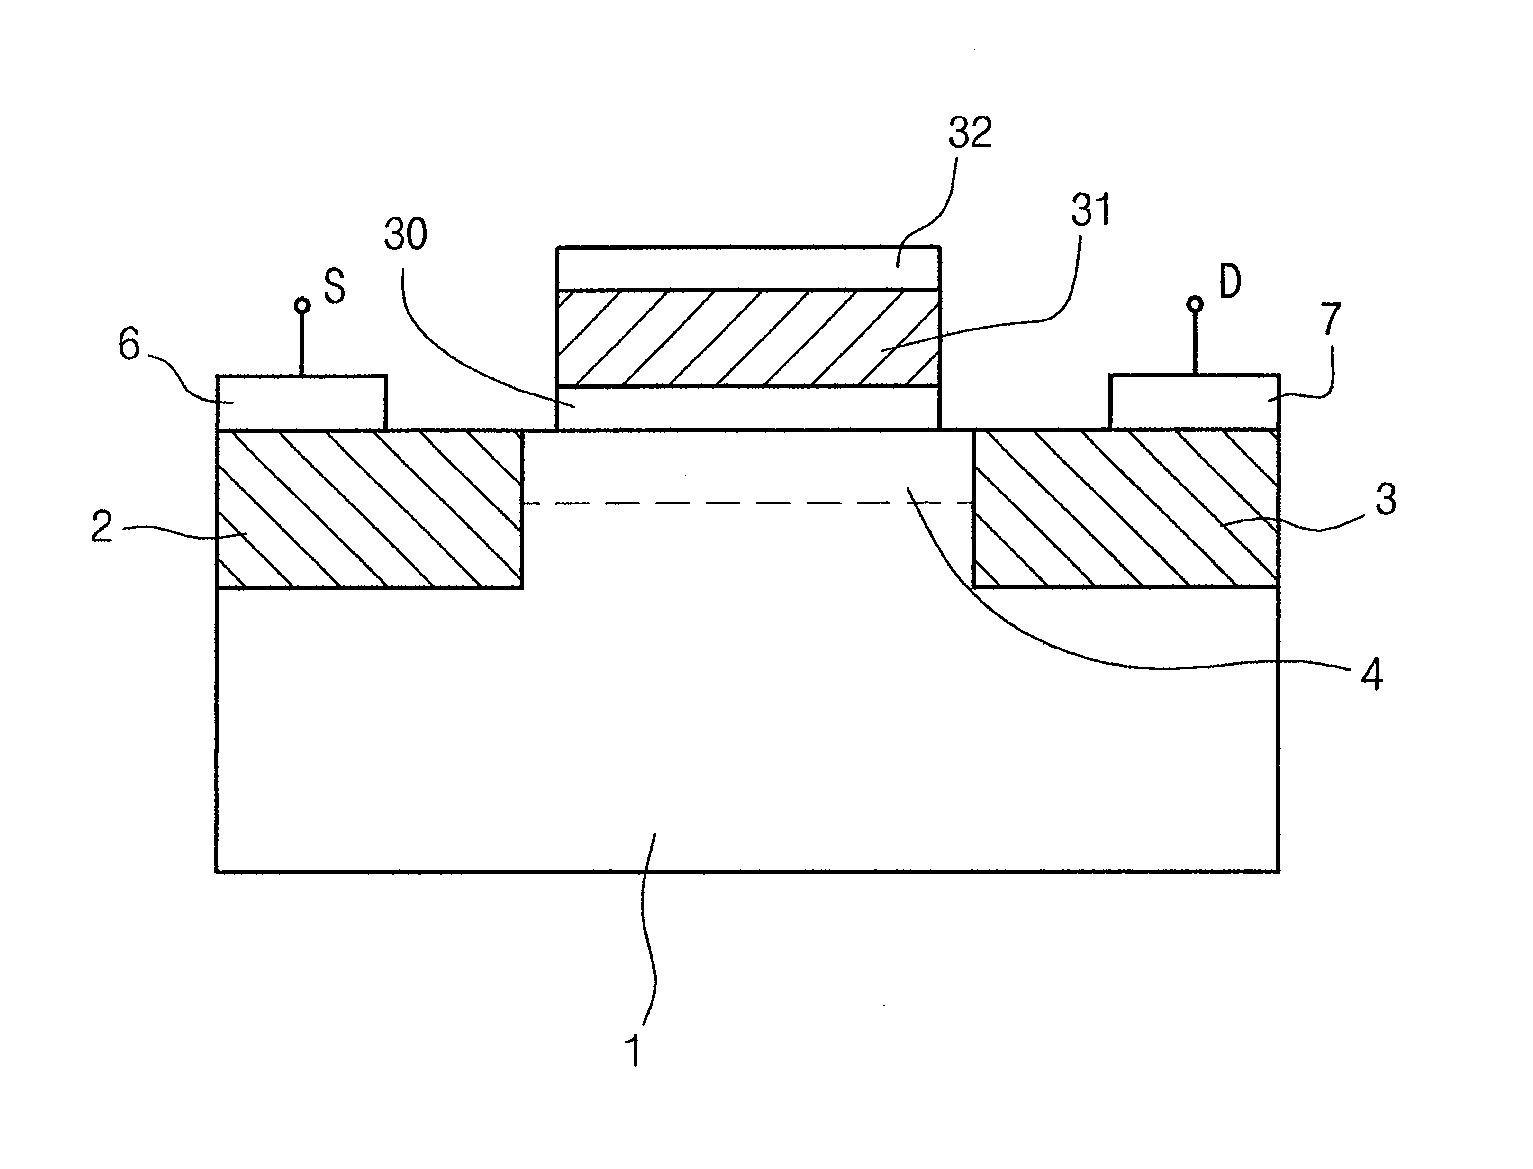 MFMS-FET, Ferroelectric Memory Device, And Methods Of Manufacturing The Same